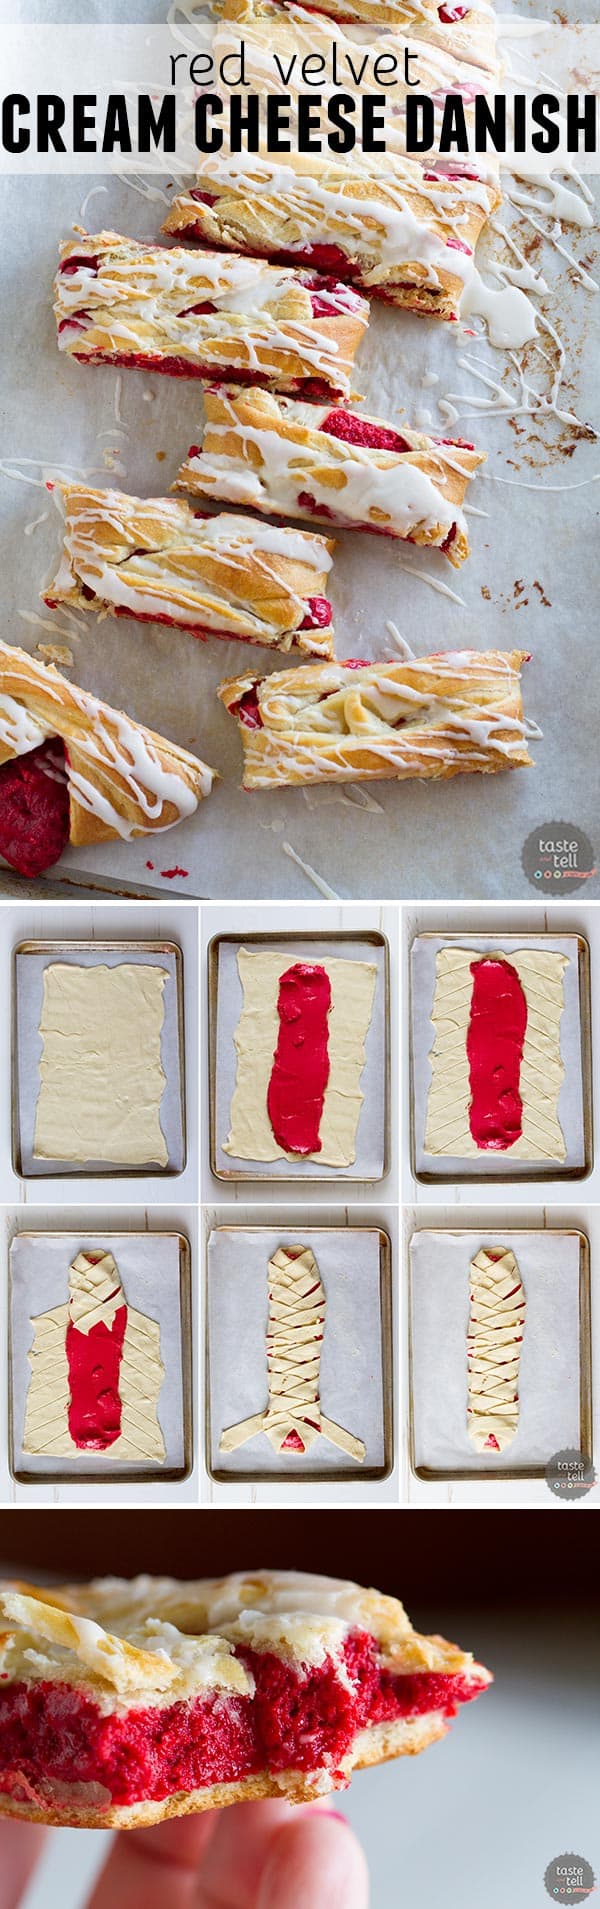 This easy cream cheese danish goes red velvet!  A creamy red velvet center is surrounded by crescent dough and baked to perfection.  An easy glaze finishes off this danish that is perfect for breakfast or brunch.